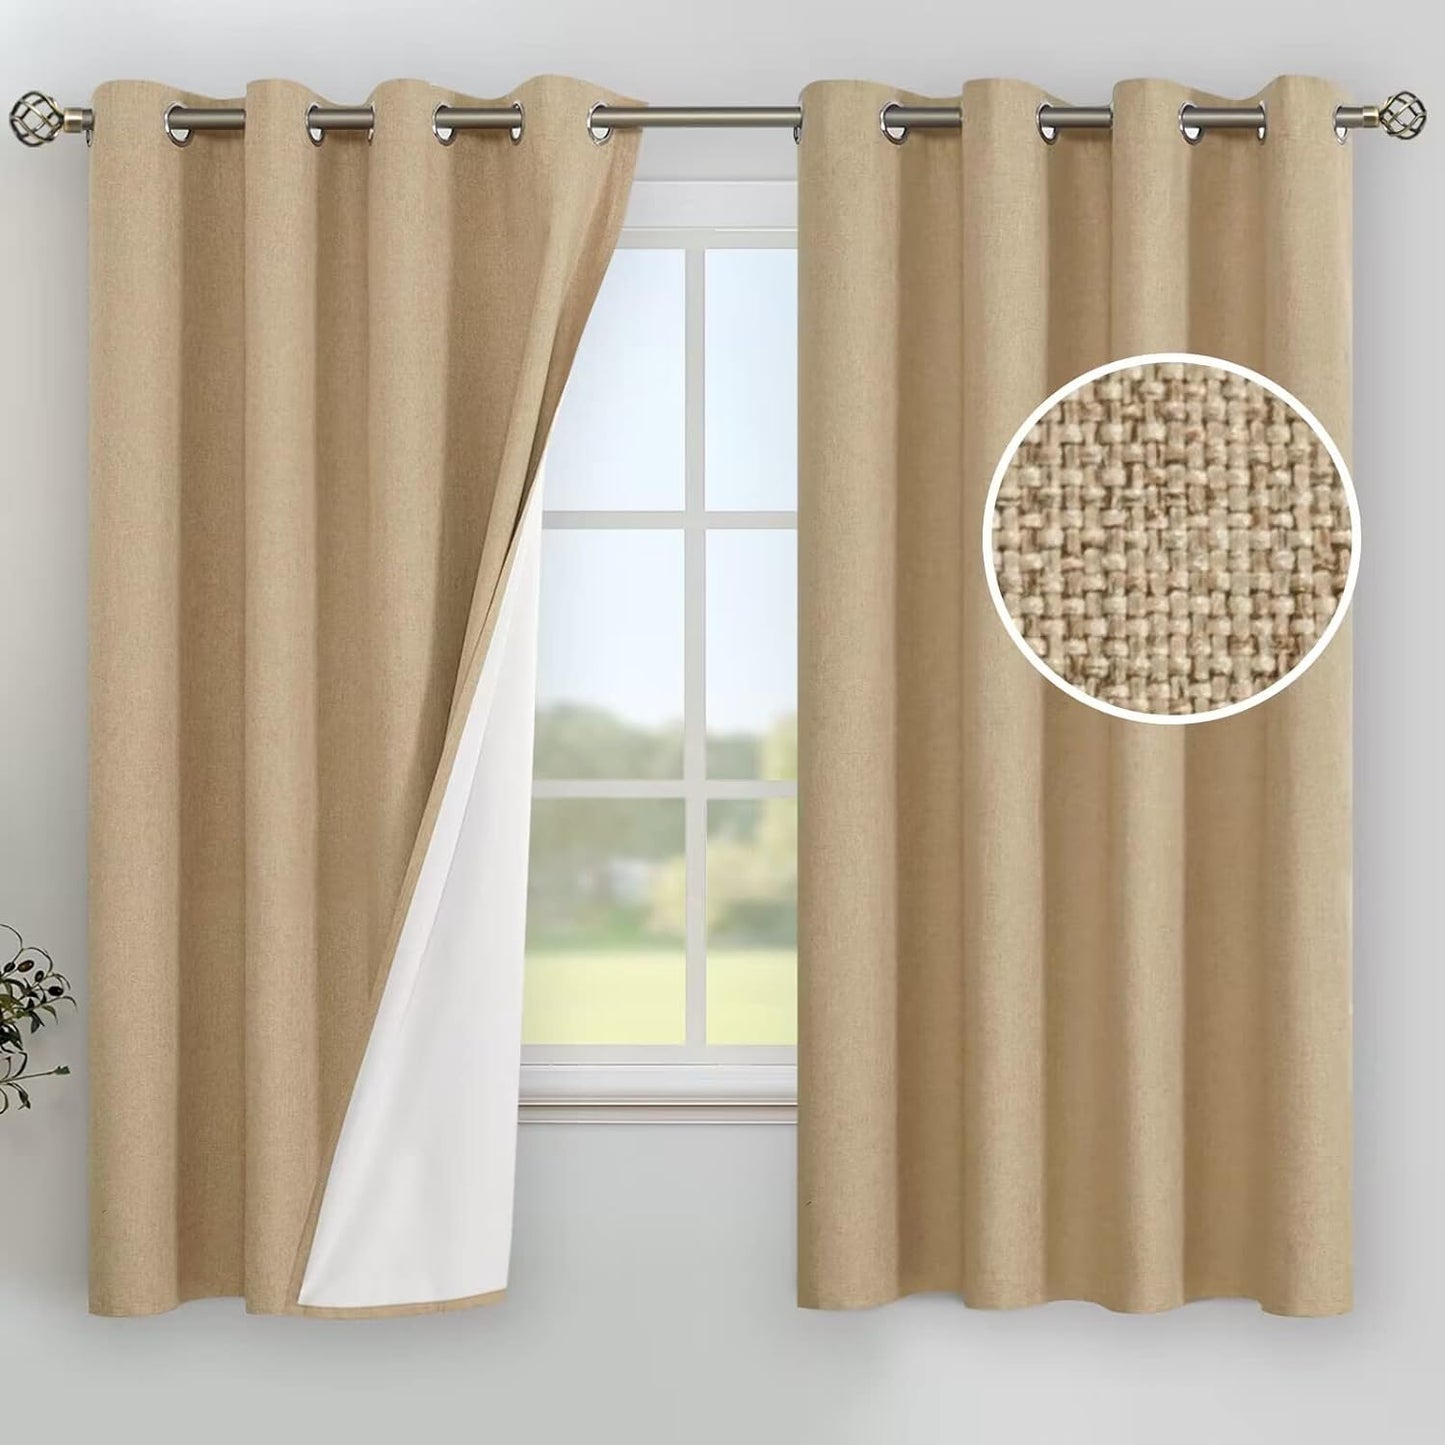 Youngstex Linen Blackout Curtains 63 Inches Long, Grommet Full Room Darkening Linen Window Drapes Thermal Insulated for Living Room Bedroom, 2 Panels, 52 X 63 Inch, Linen  YoungsTex Khaki 52W X 63L 